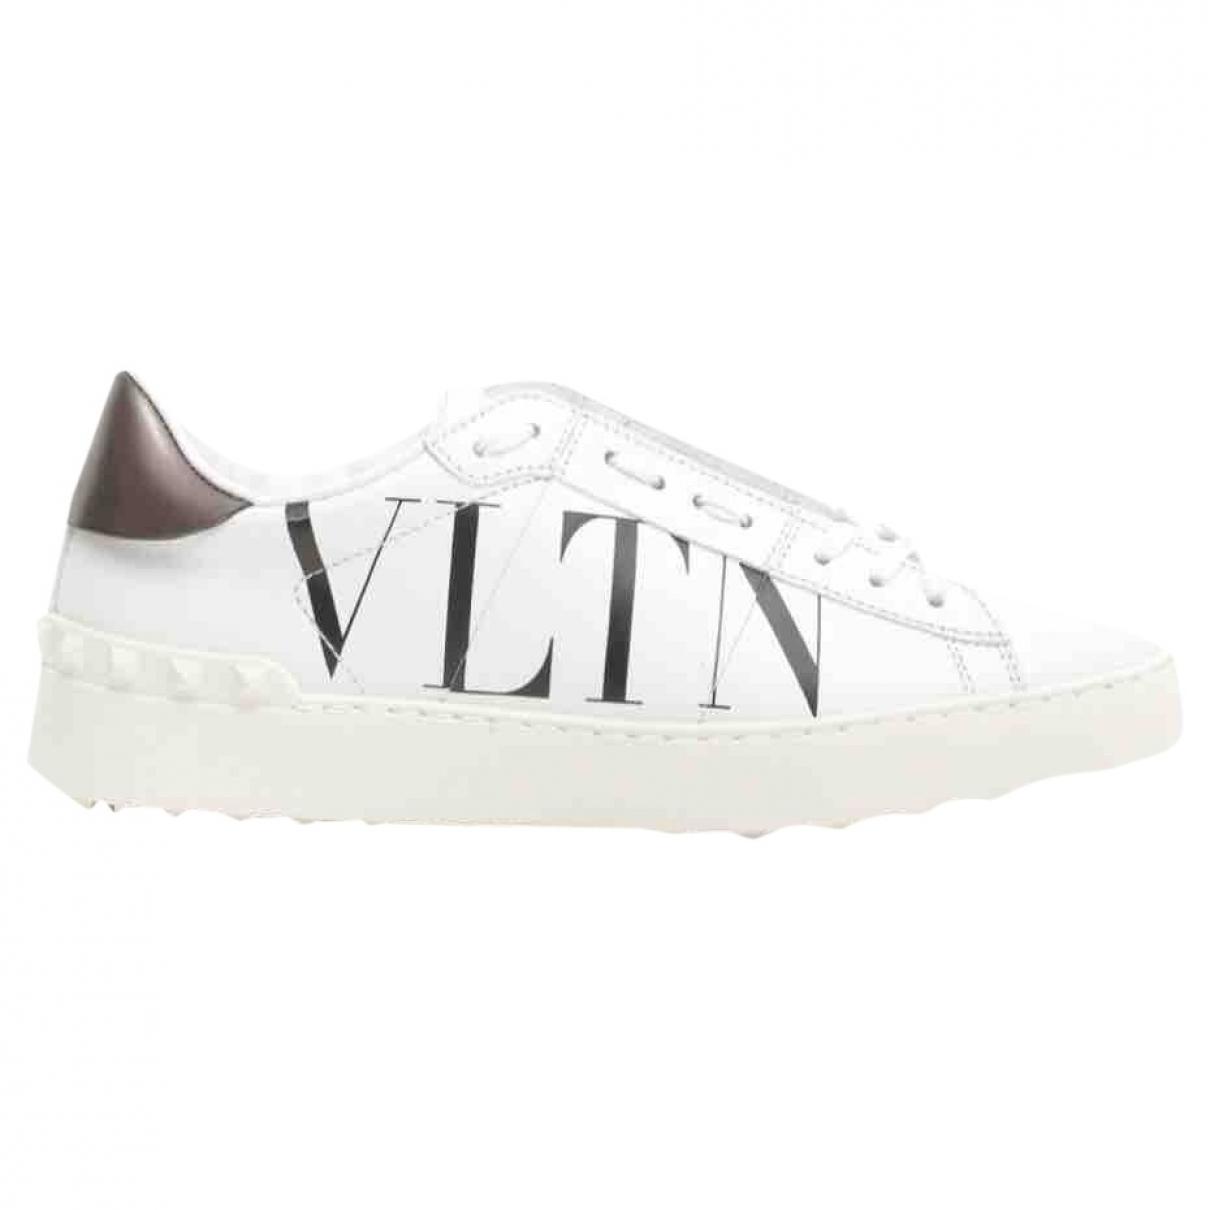 Valentino Vltn Rockstud Leather Trainers in White for Men - Lyst